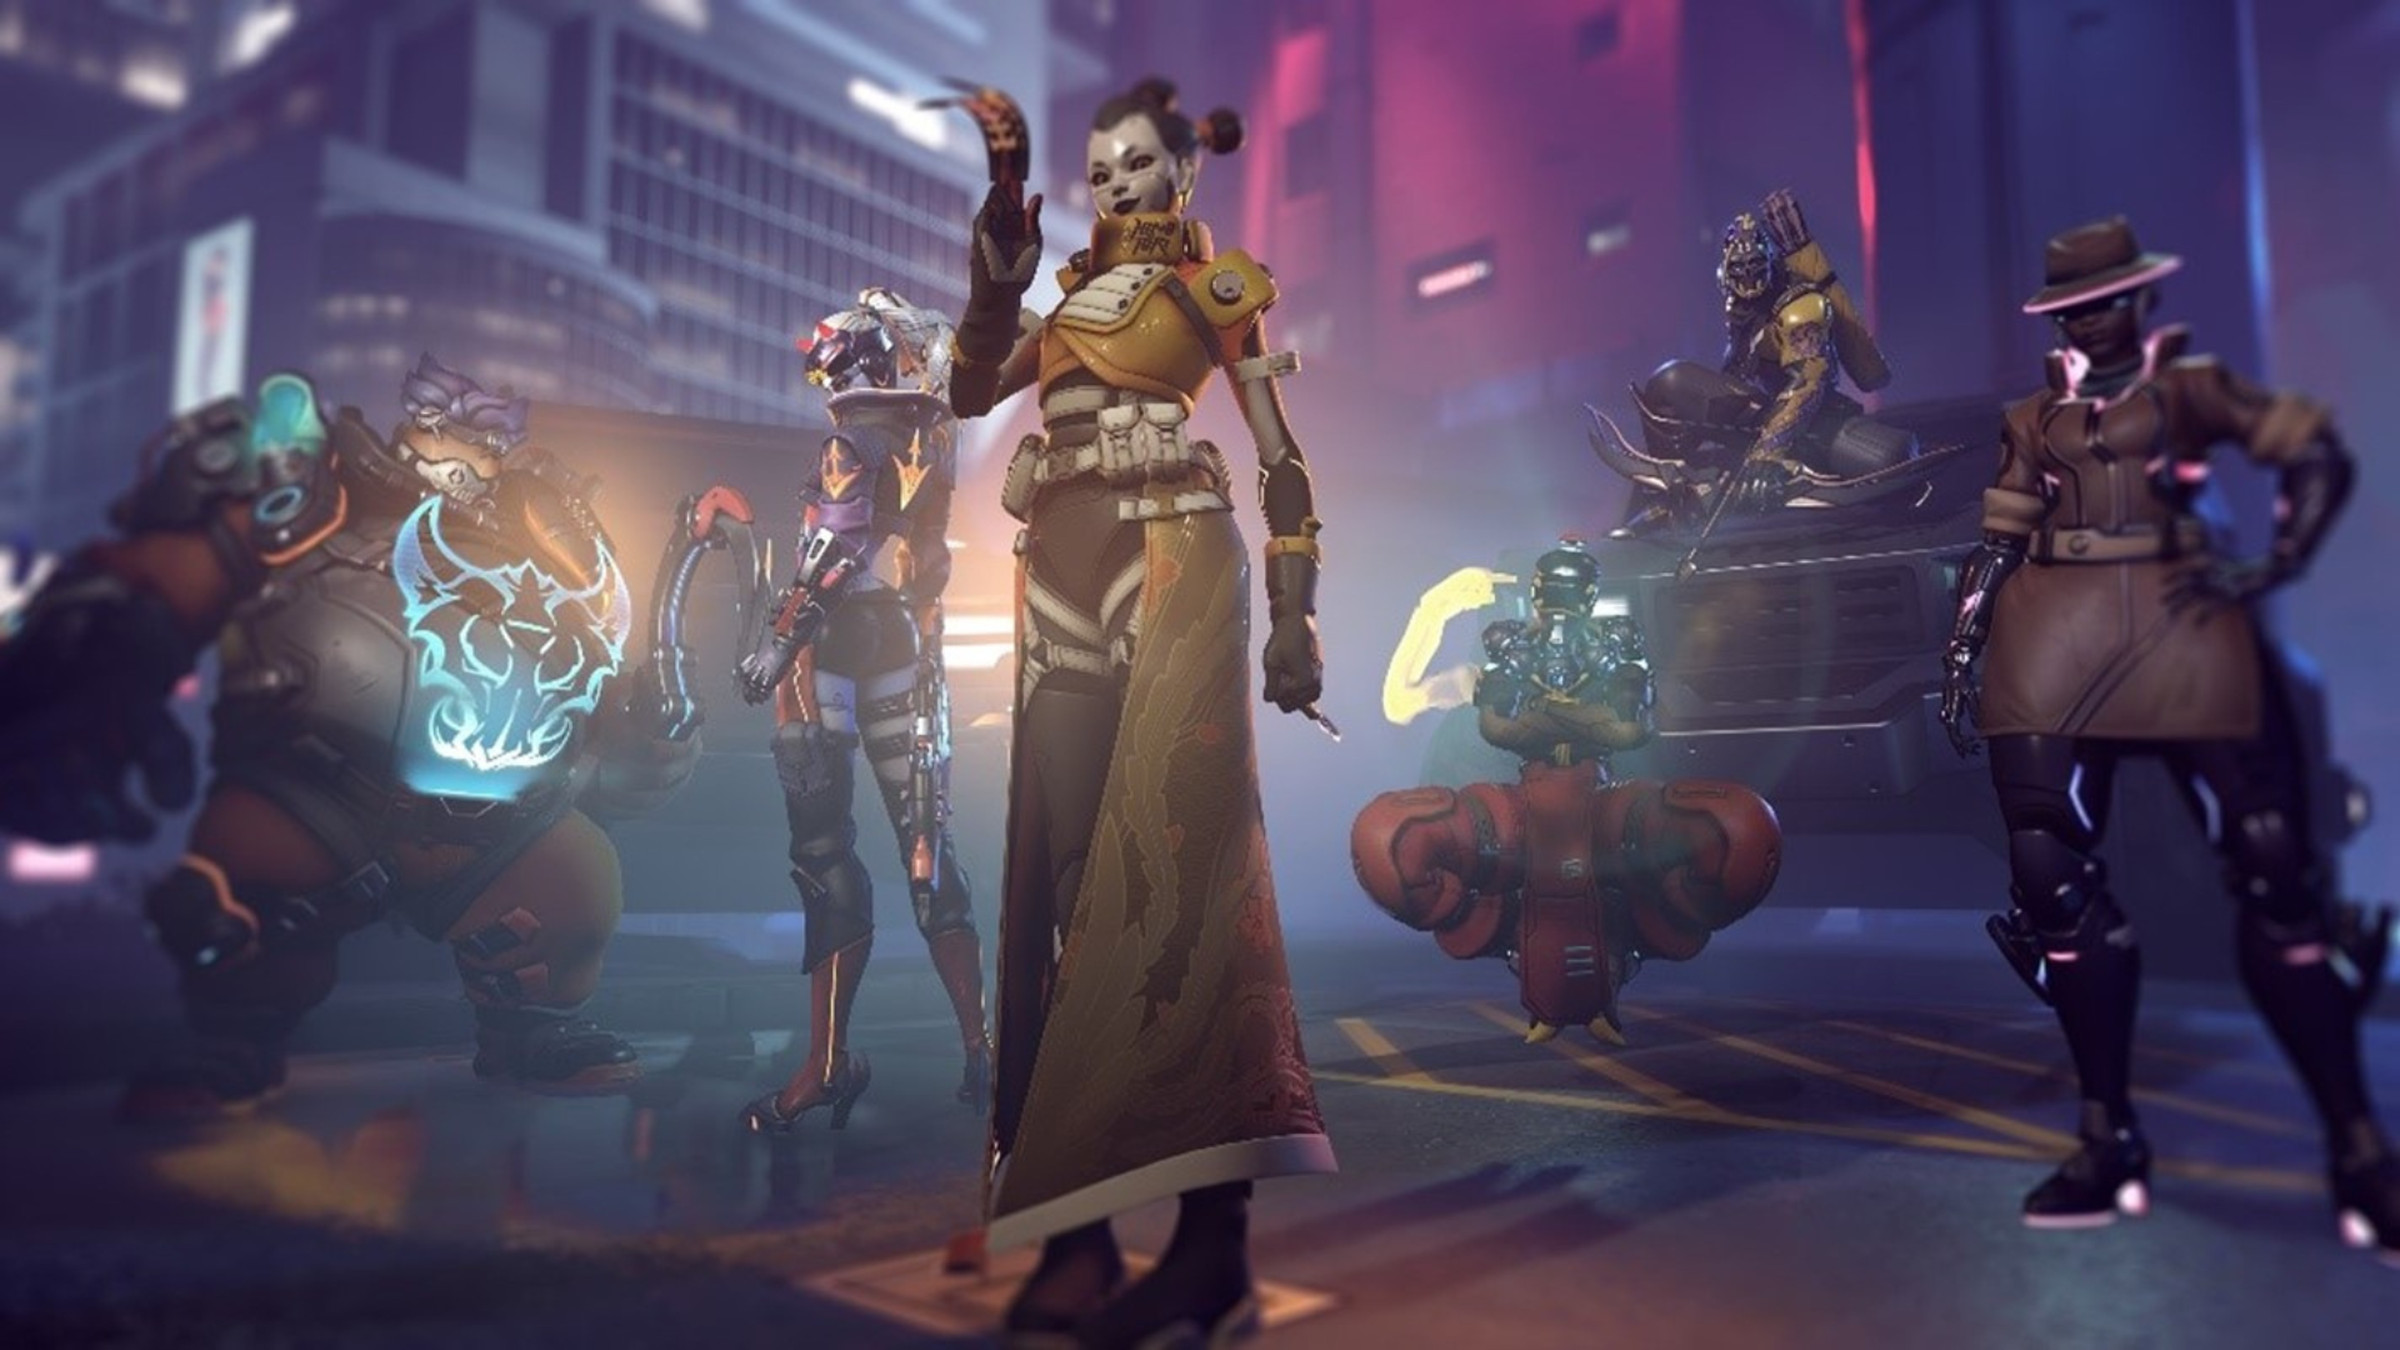 Screenshot from Overwatch 2 highlighting Season 1’s cyberpunk theme featuring several Overwatch heroes bedecked in futuristic cyberpunk outfits